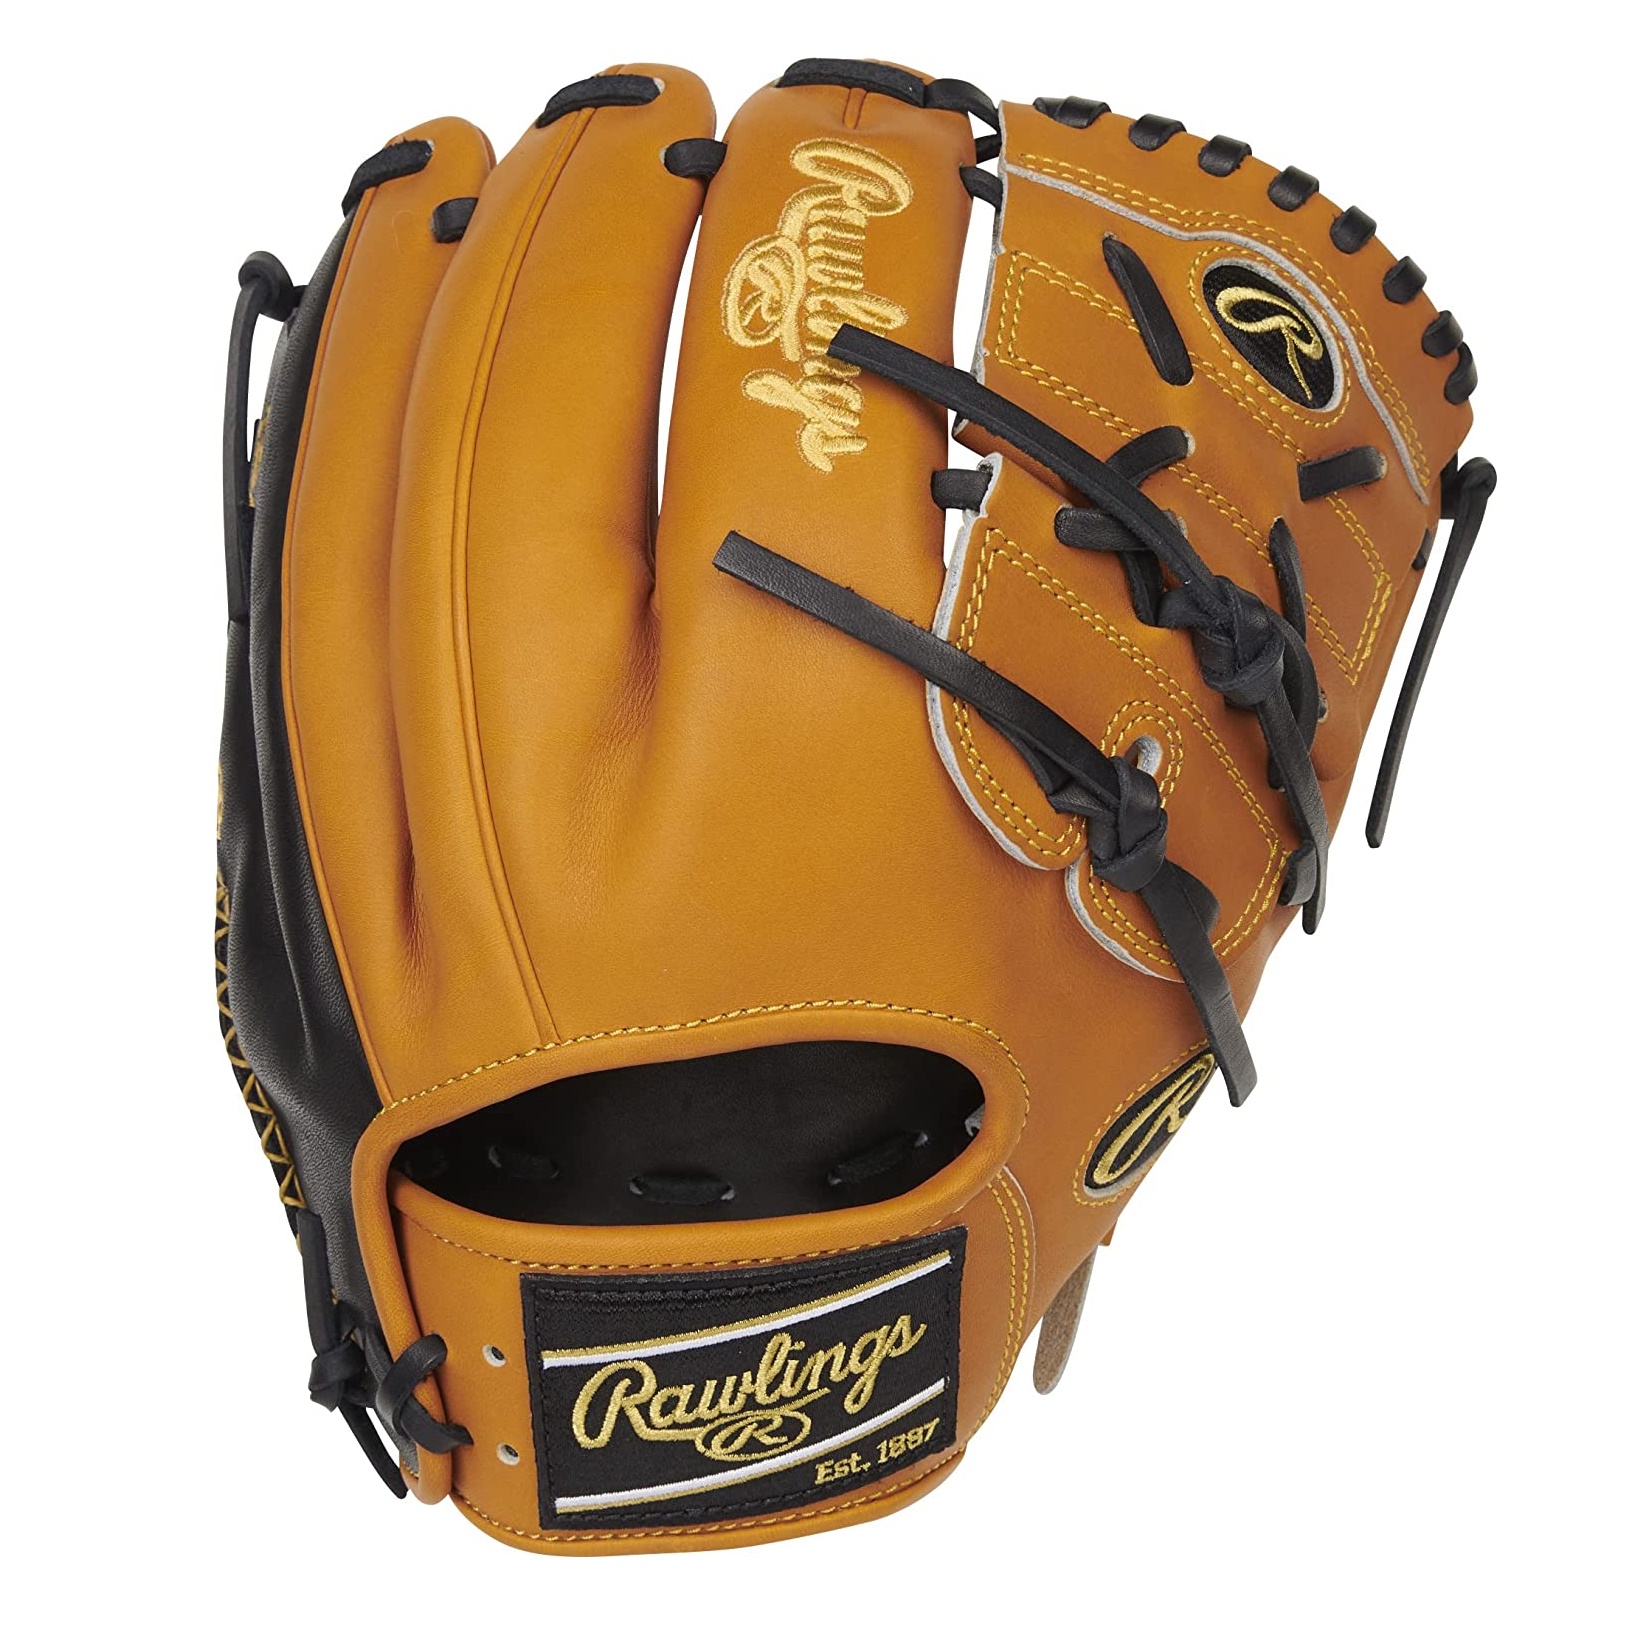 Constructed from Rawlings' world-renowned Heart of the Hide steer leather. Taken exclusively from hand selected pro-grade hides, Heart of the Hide leather is ultra-durable & renowned for forming the perfect pocket. Made from high-quality leather, Heart of the Hide gloves are cut from the top 5% of all Rawlings US steer hide to provide unbeatable structure.